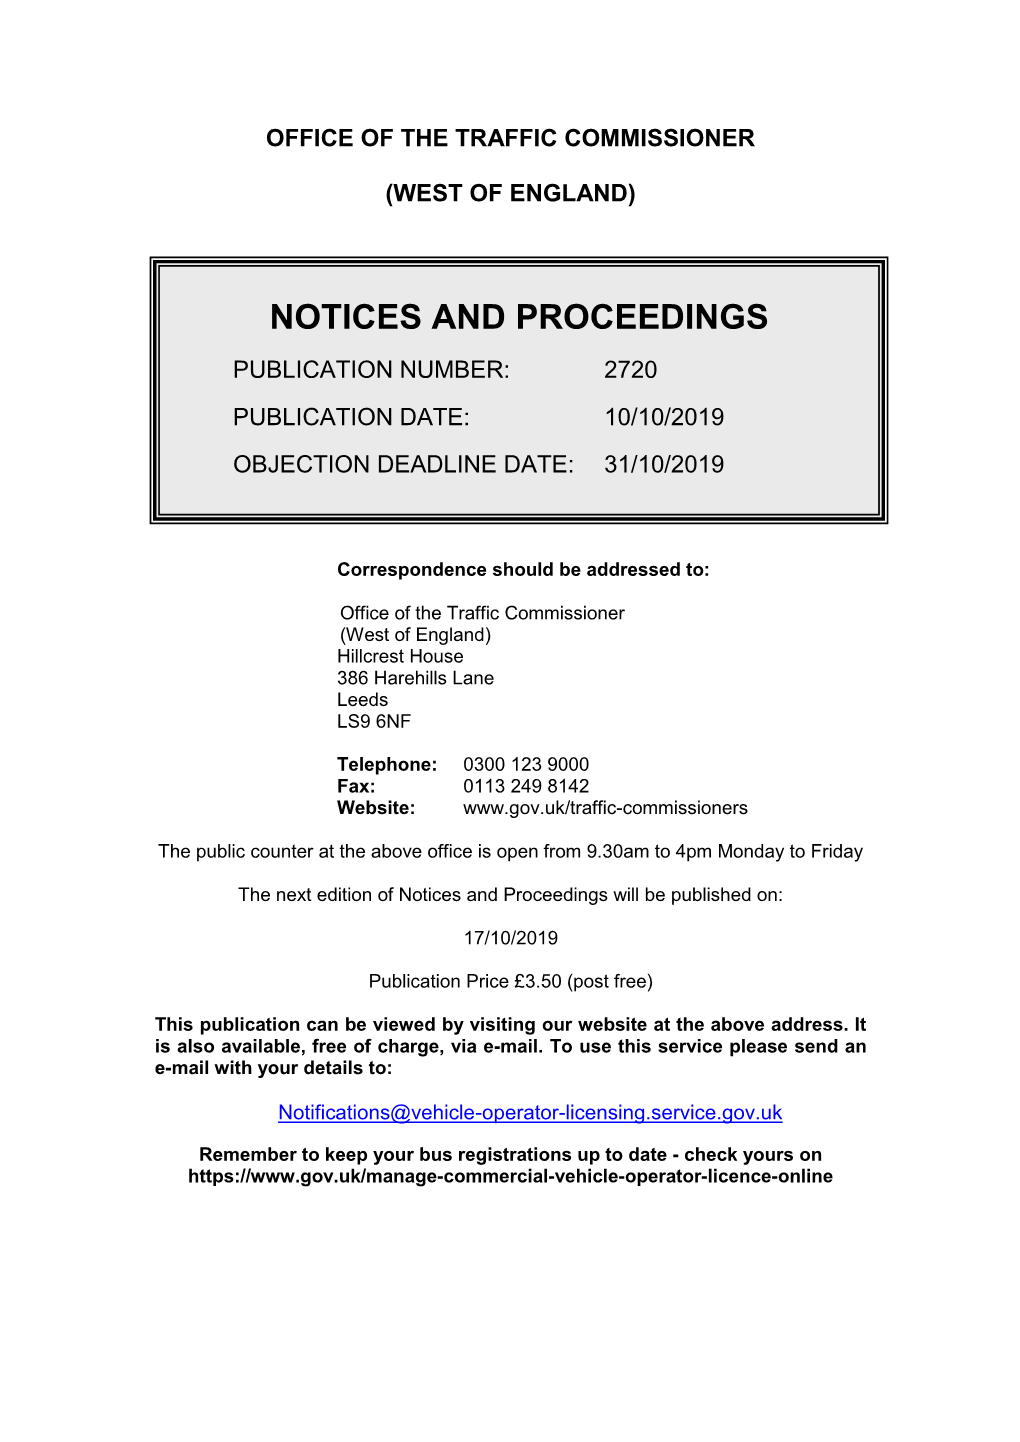 Notices and Proceedings for Th West of England